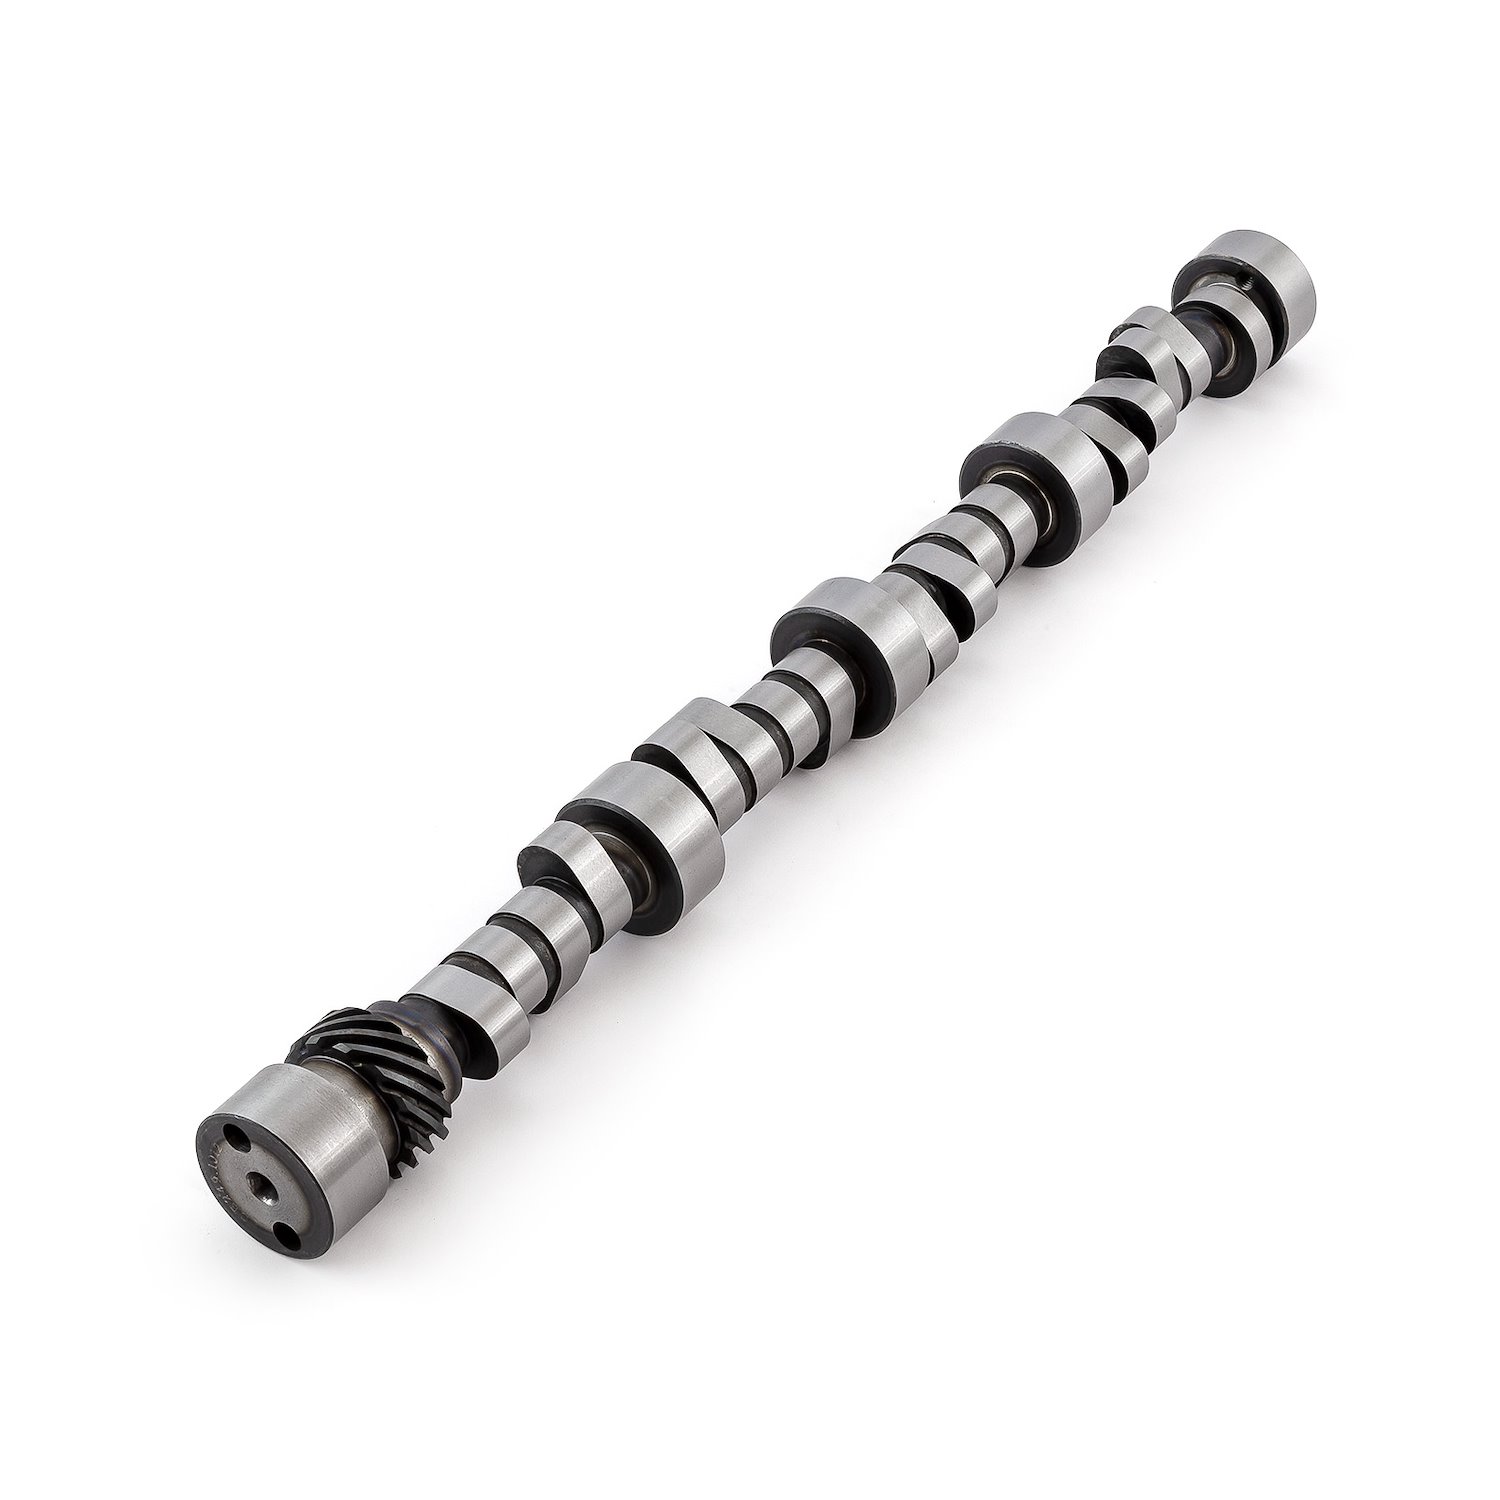 PCE249.1012 Hydraulic Roller Camshaft, Small Block Chevy 350,  Duration: 300 Int./306 Exh.